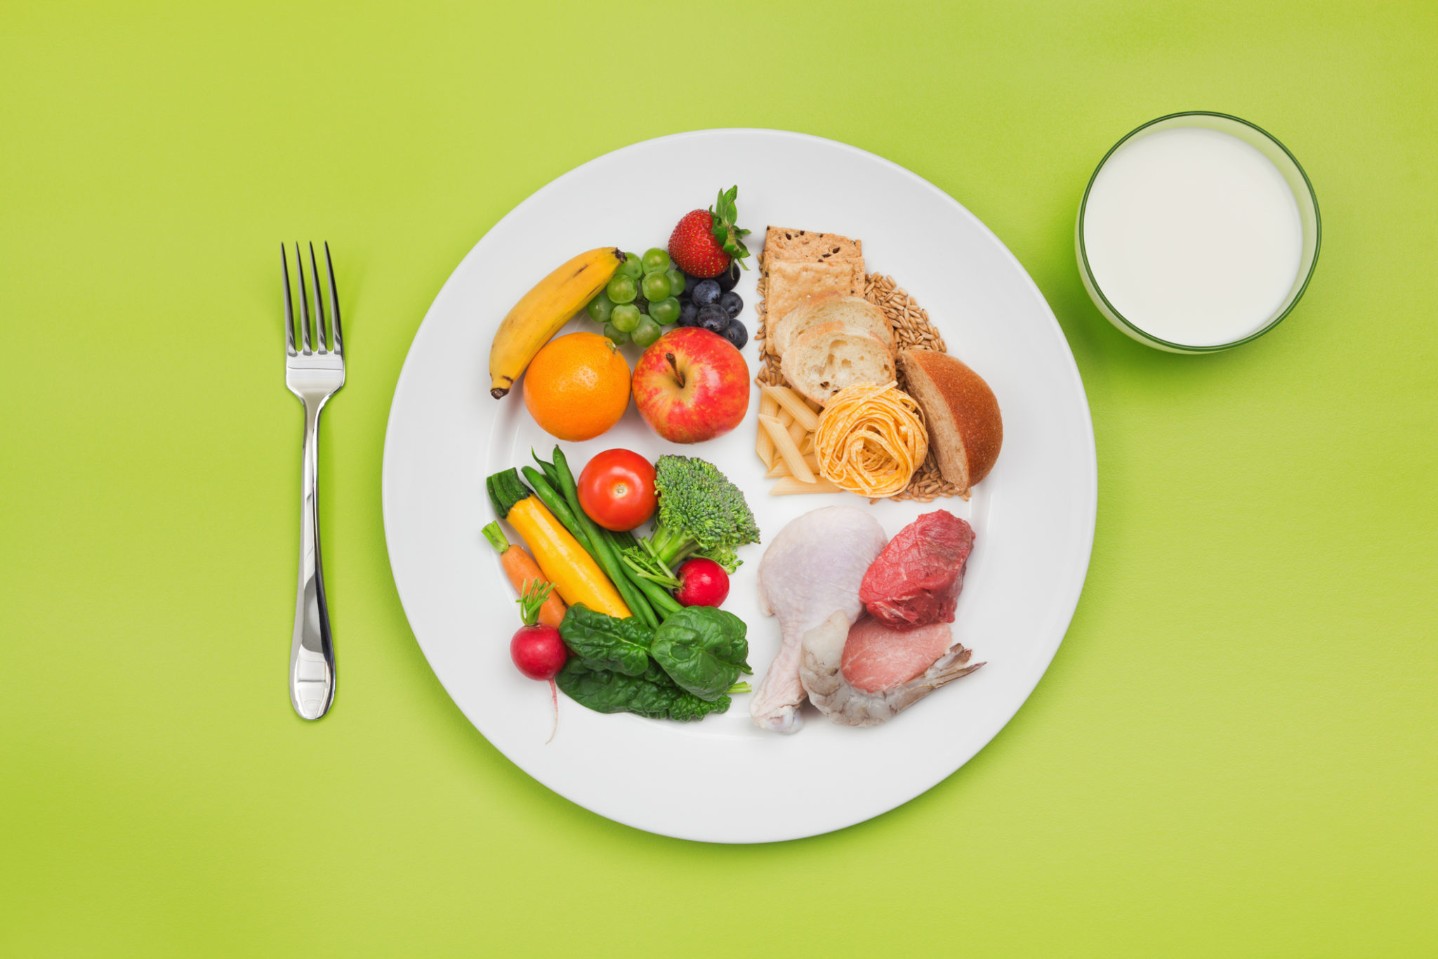 ChooseMyPlate Healthy Food and Plate of USDA Balanced Diet Recommendation